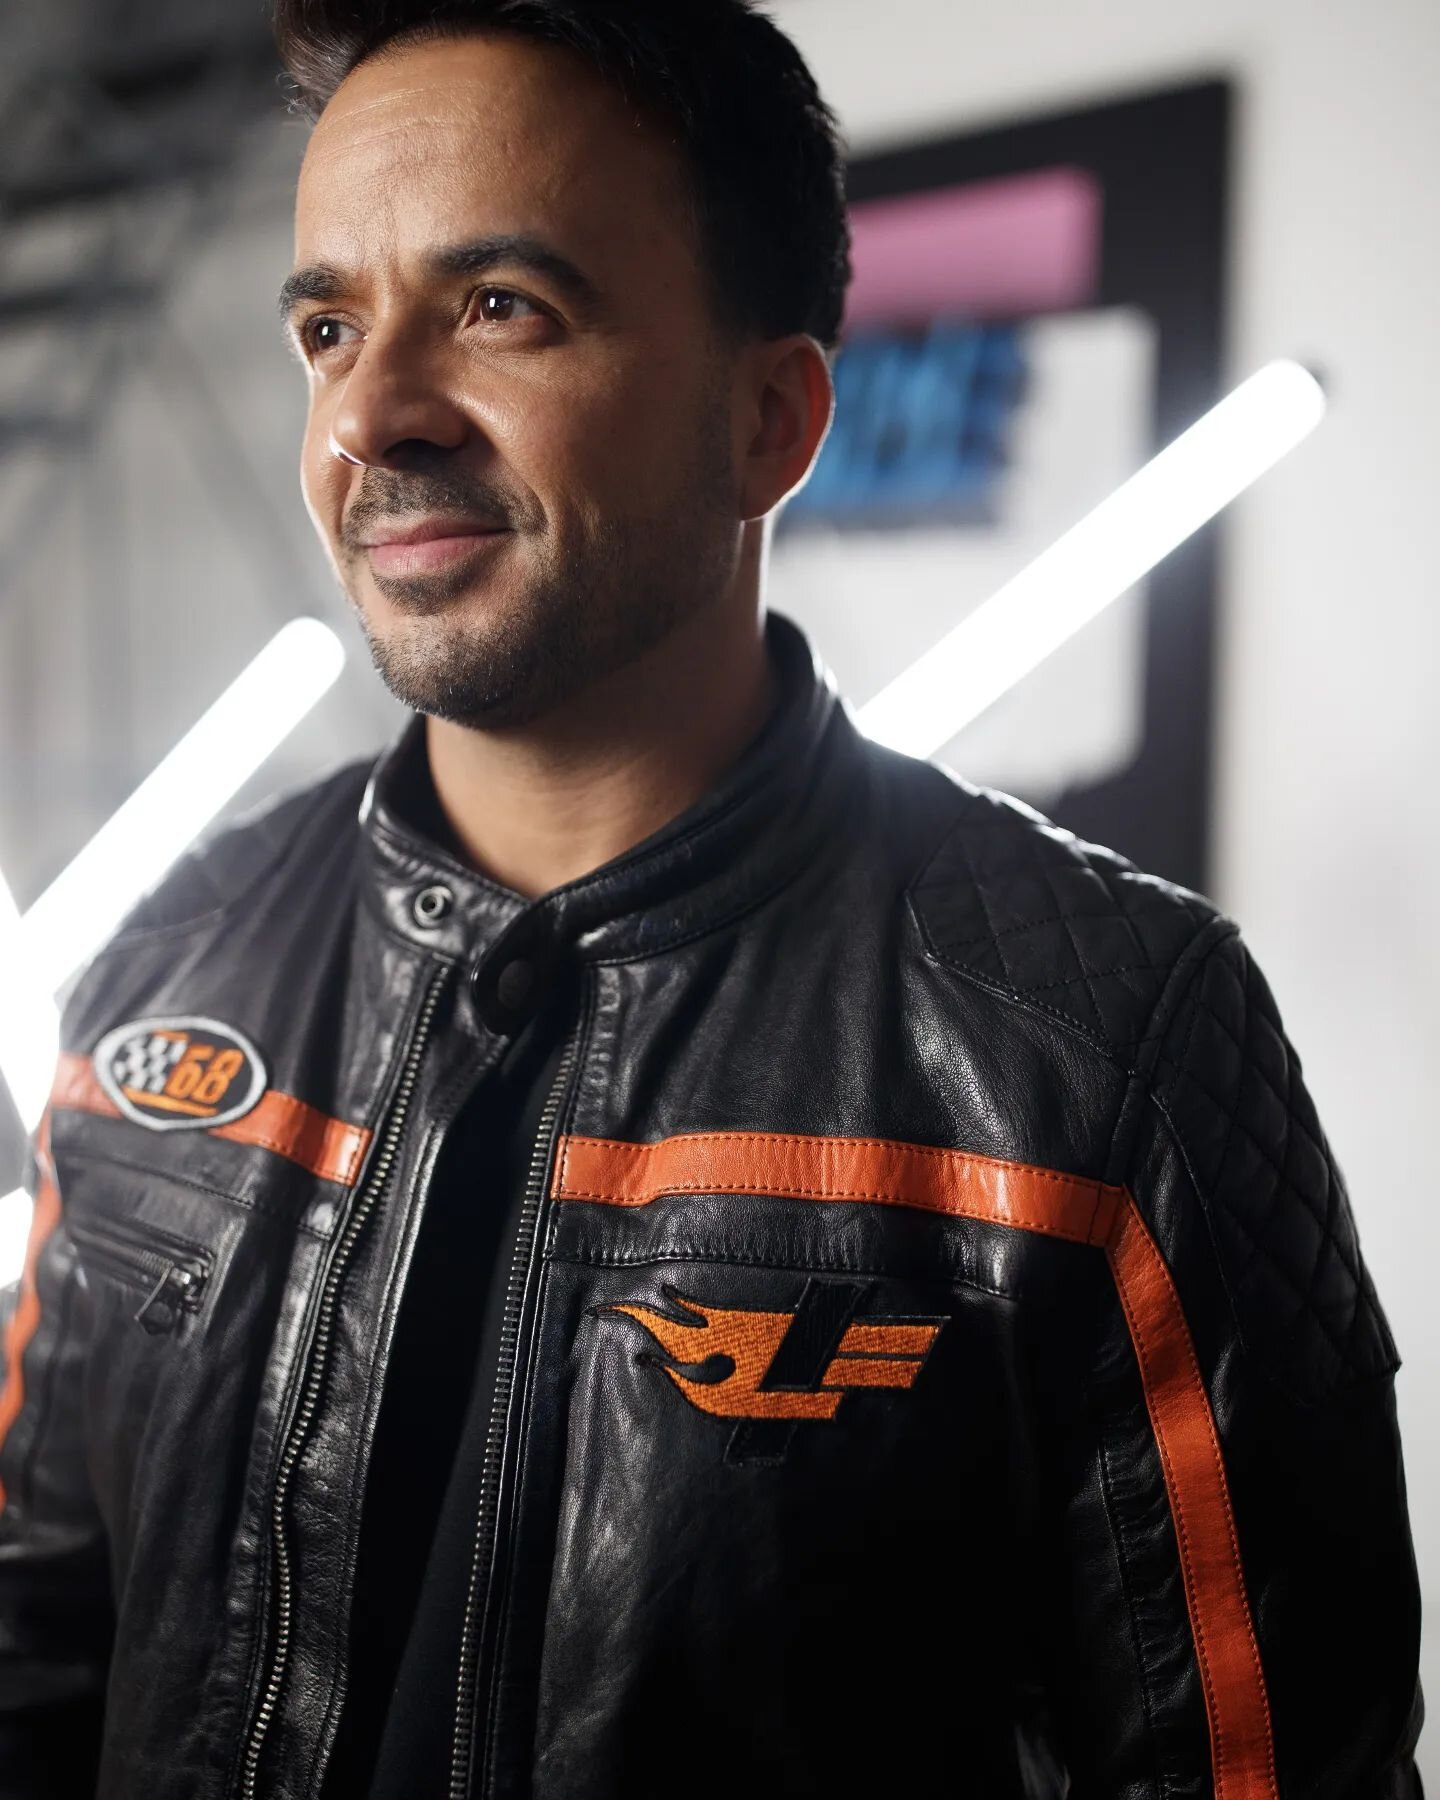 R A C I N G  S P I R I T 🔥

This leather jacket draws its inspiration from motor racing. An unique model developed @luisfonsi

#luisfonsi #hotwheels #custom #leather #jacket #leatherjacket #motojacket #apparel #featured #limitededition #fashion #fas